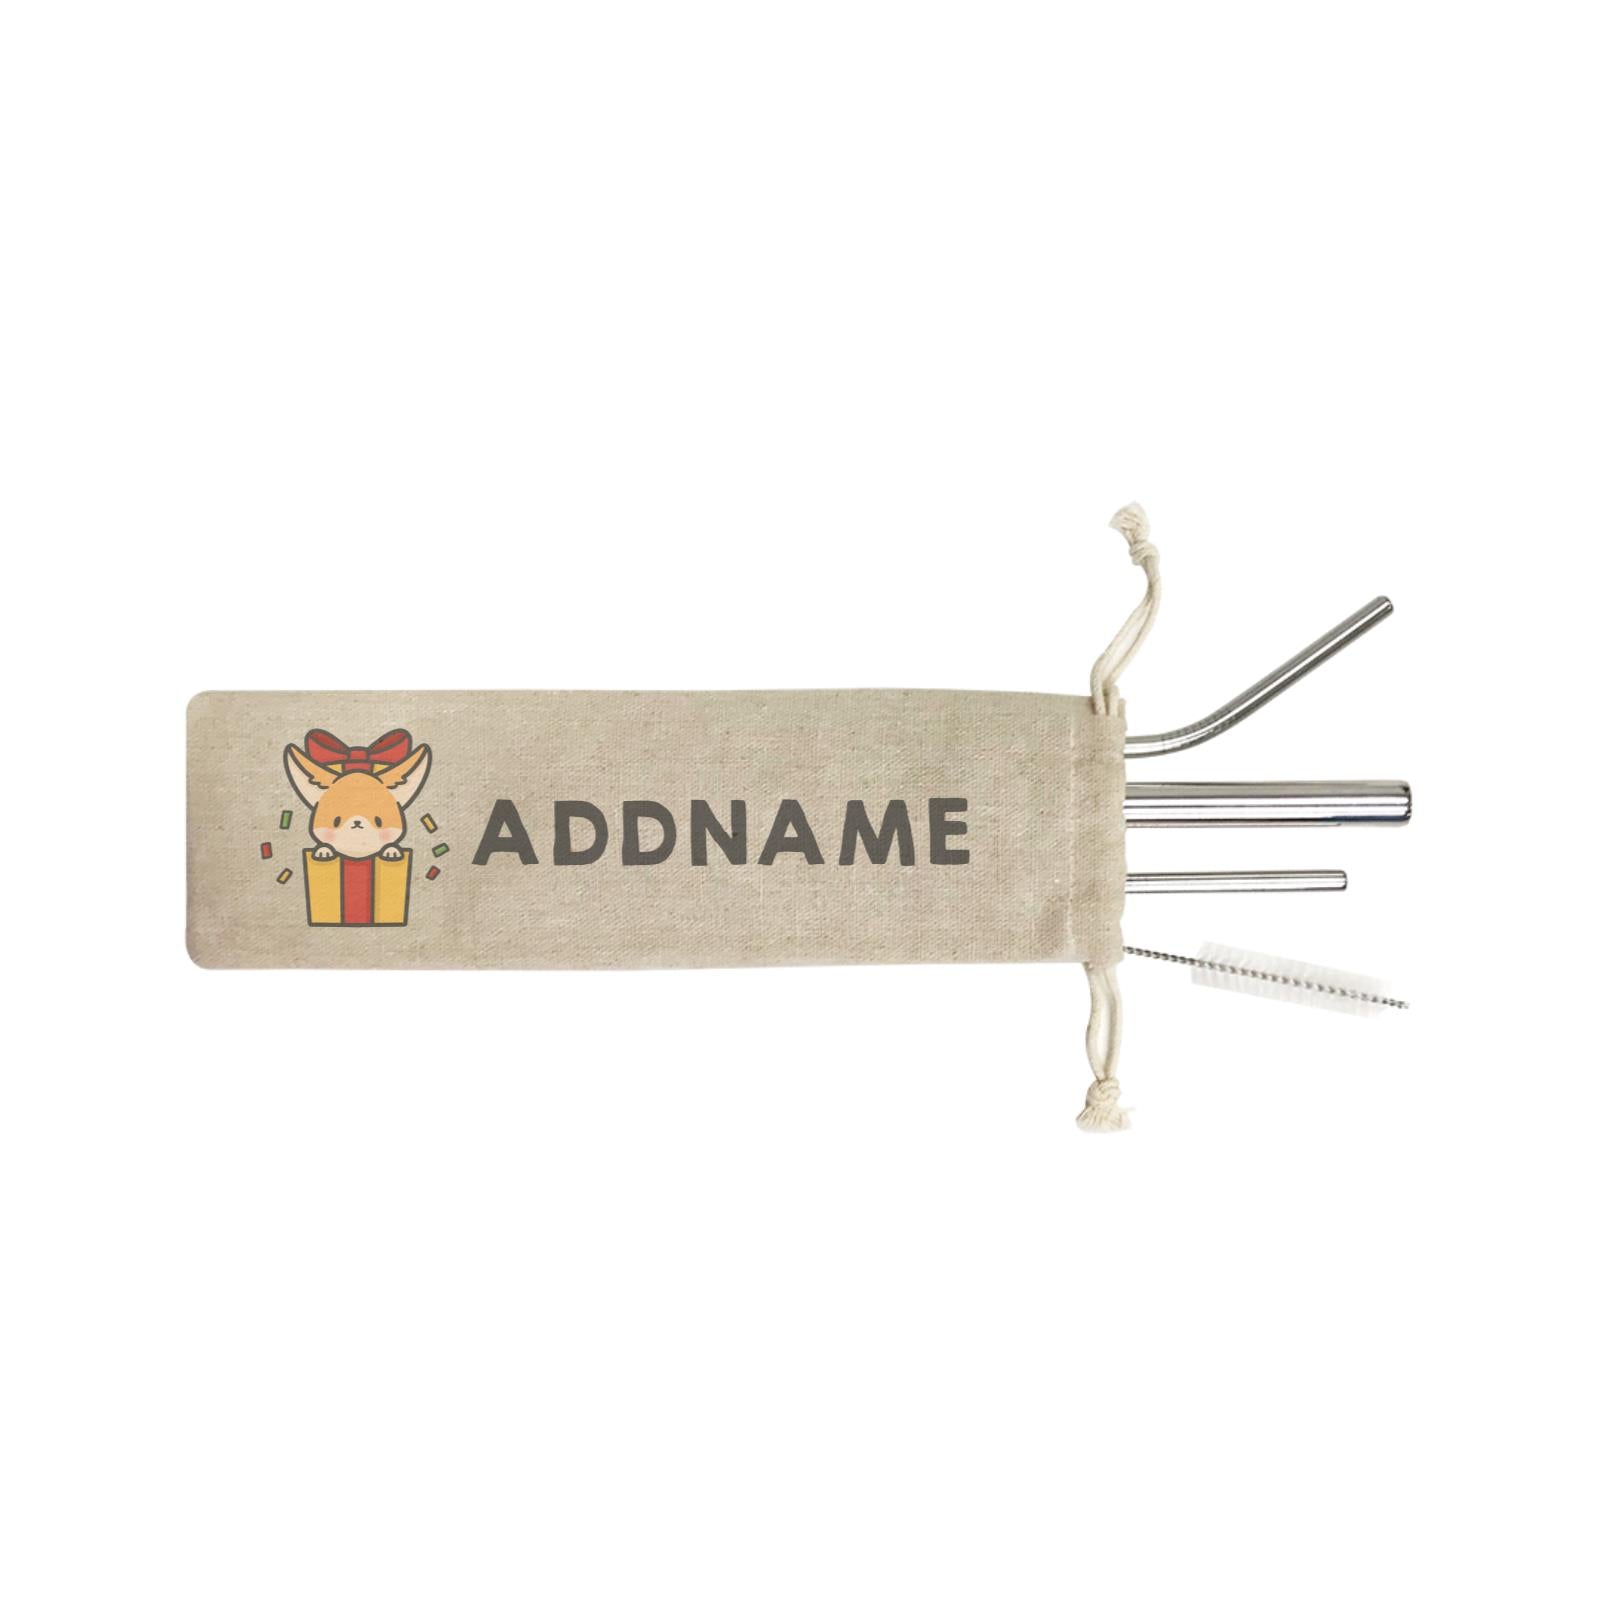 Xmas Cute Dog In Gift Box Addname SB 4-in-1 Stainless Steel Straw Set In a Satchel